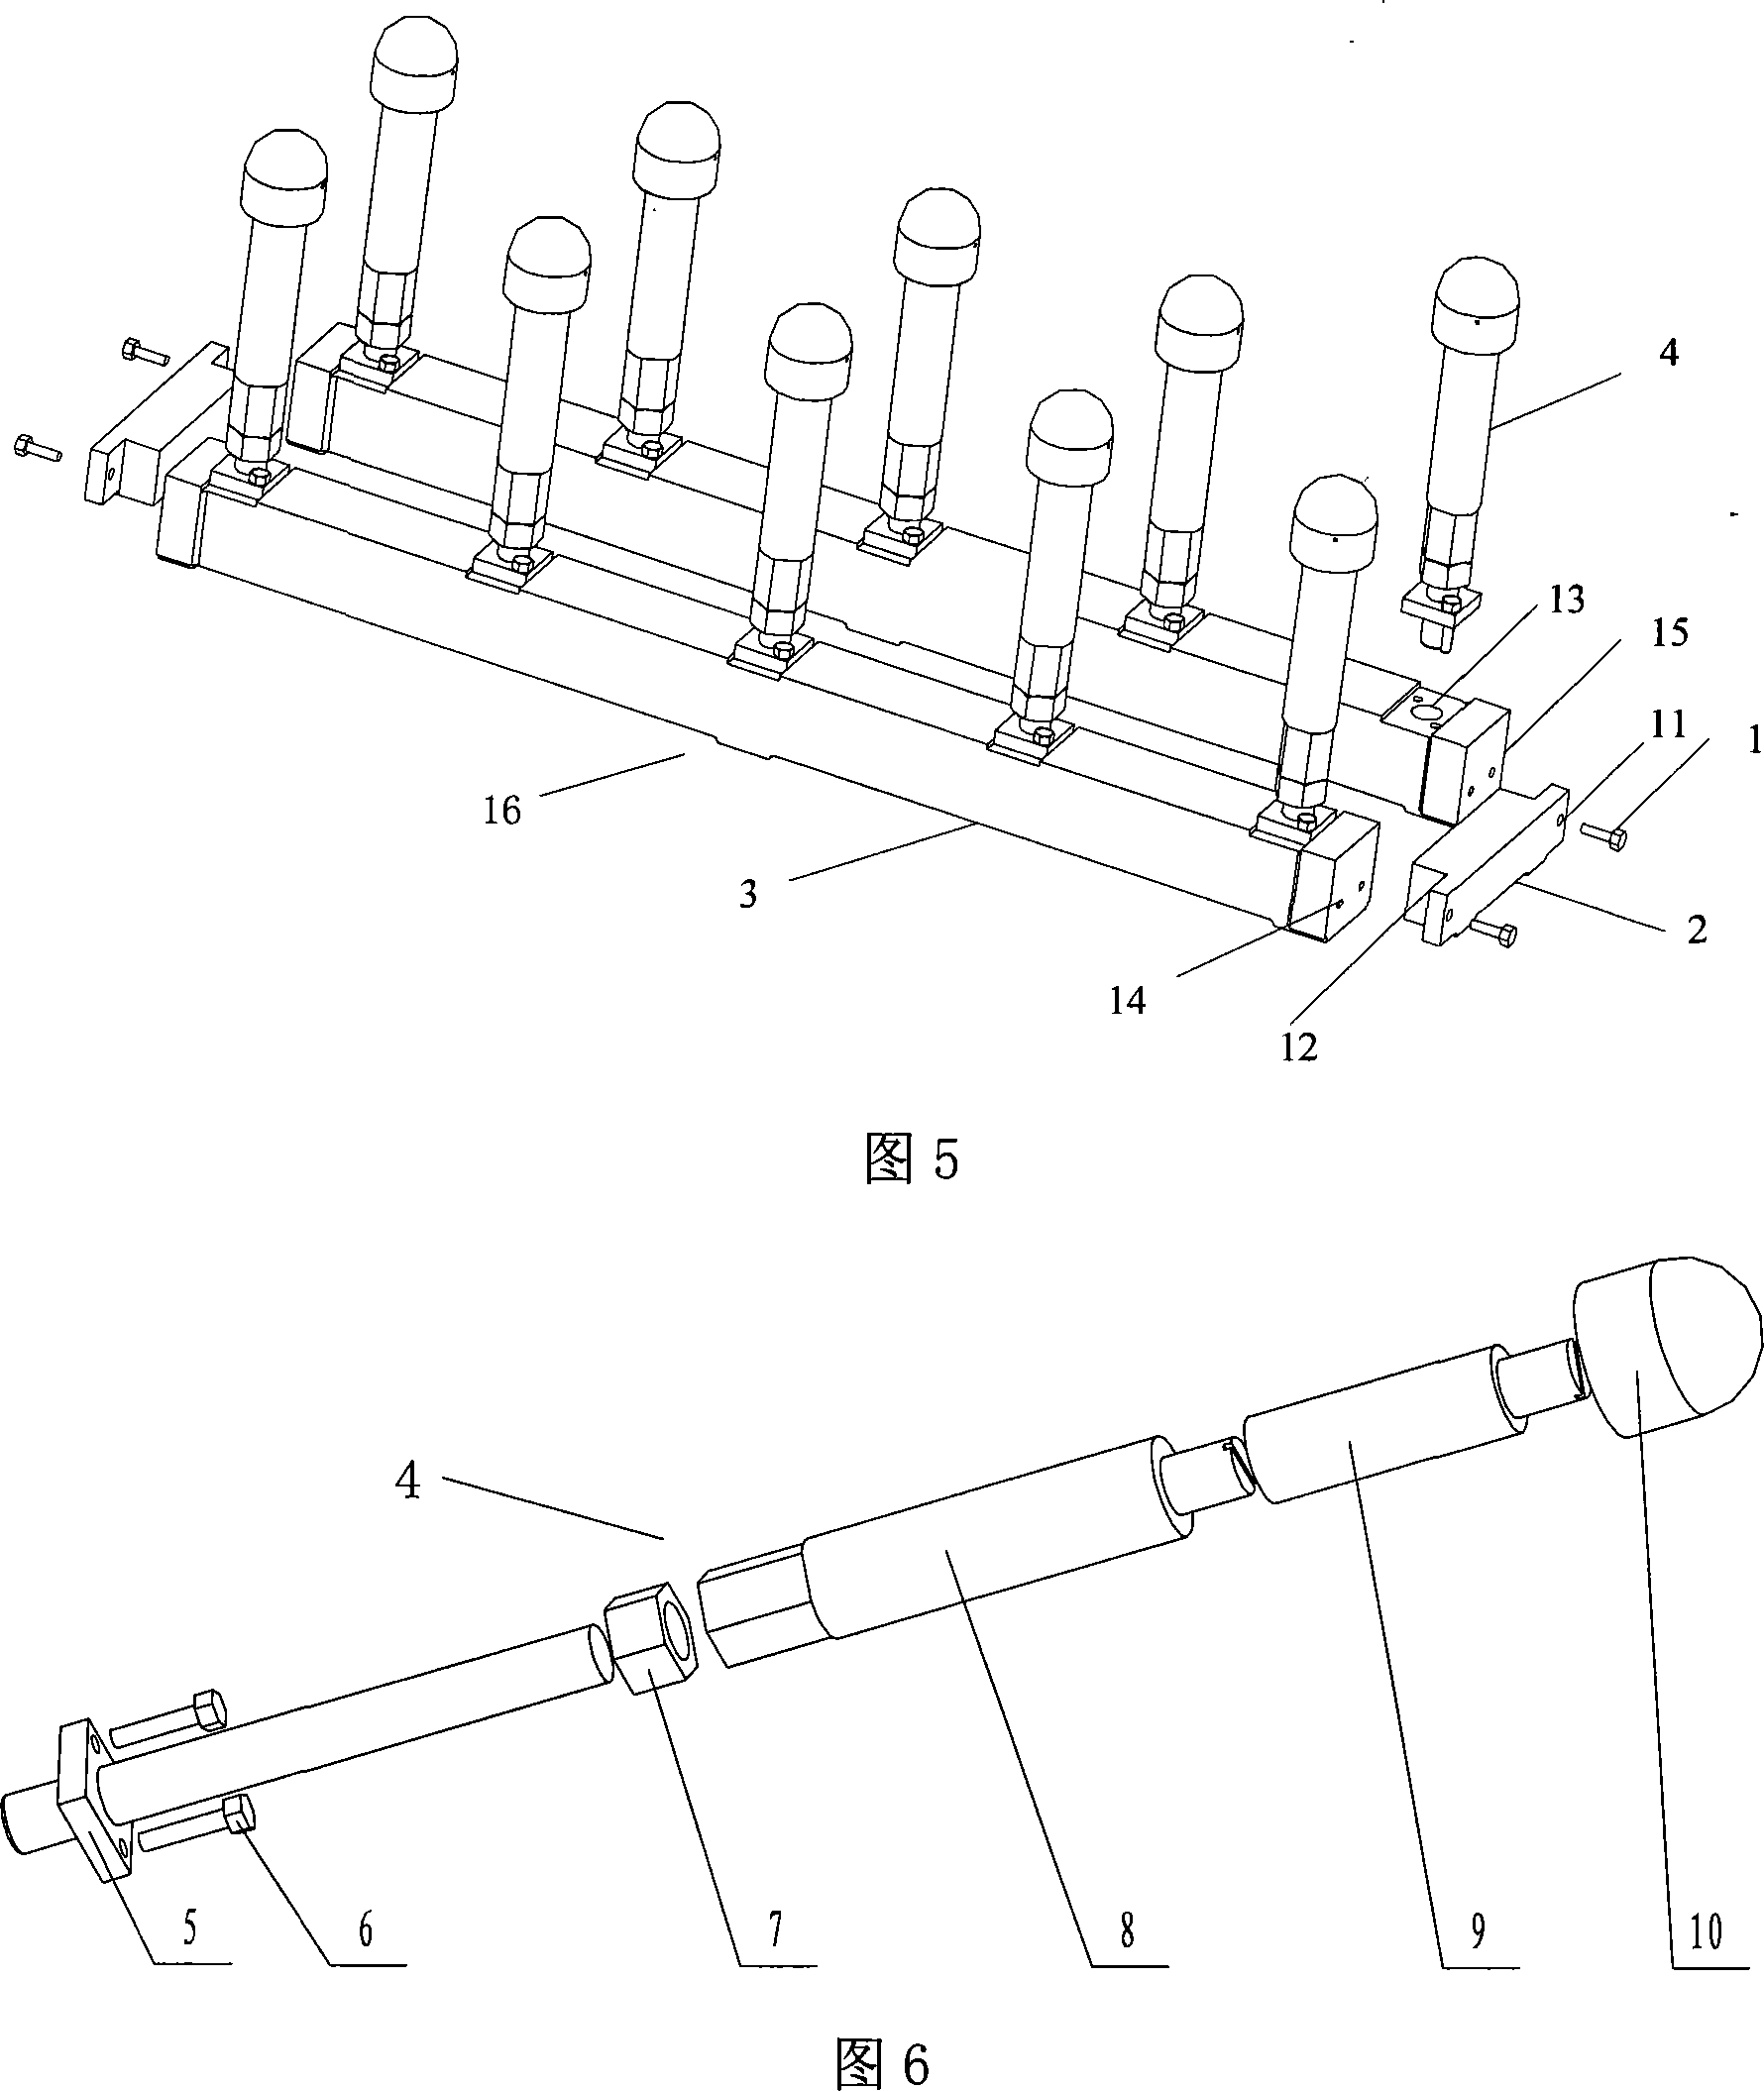 Combined skin-covering face measuring flexible multi-point support device